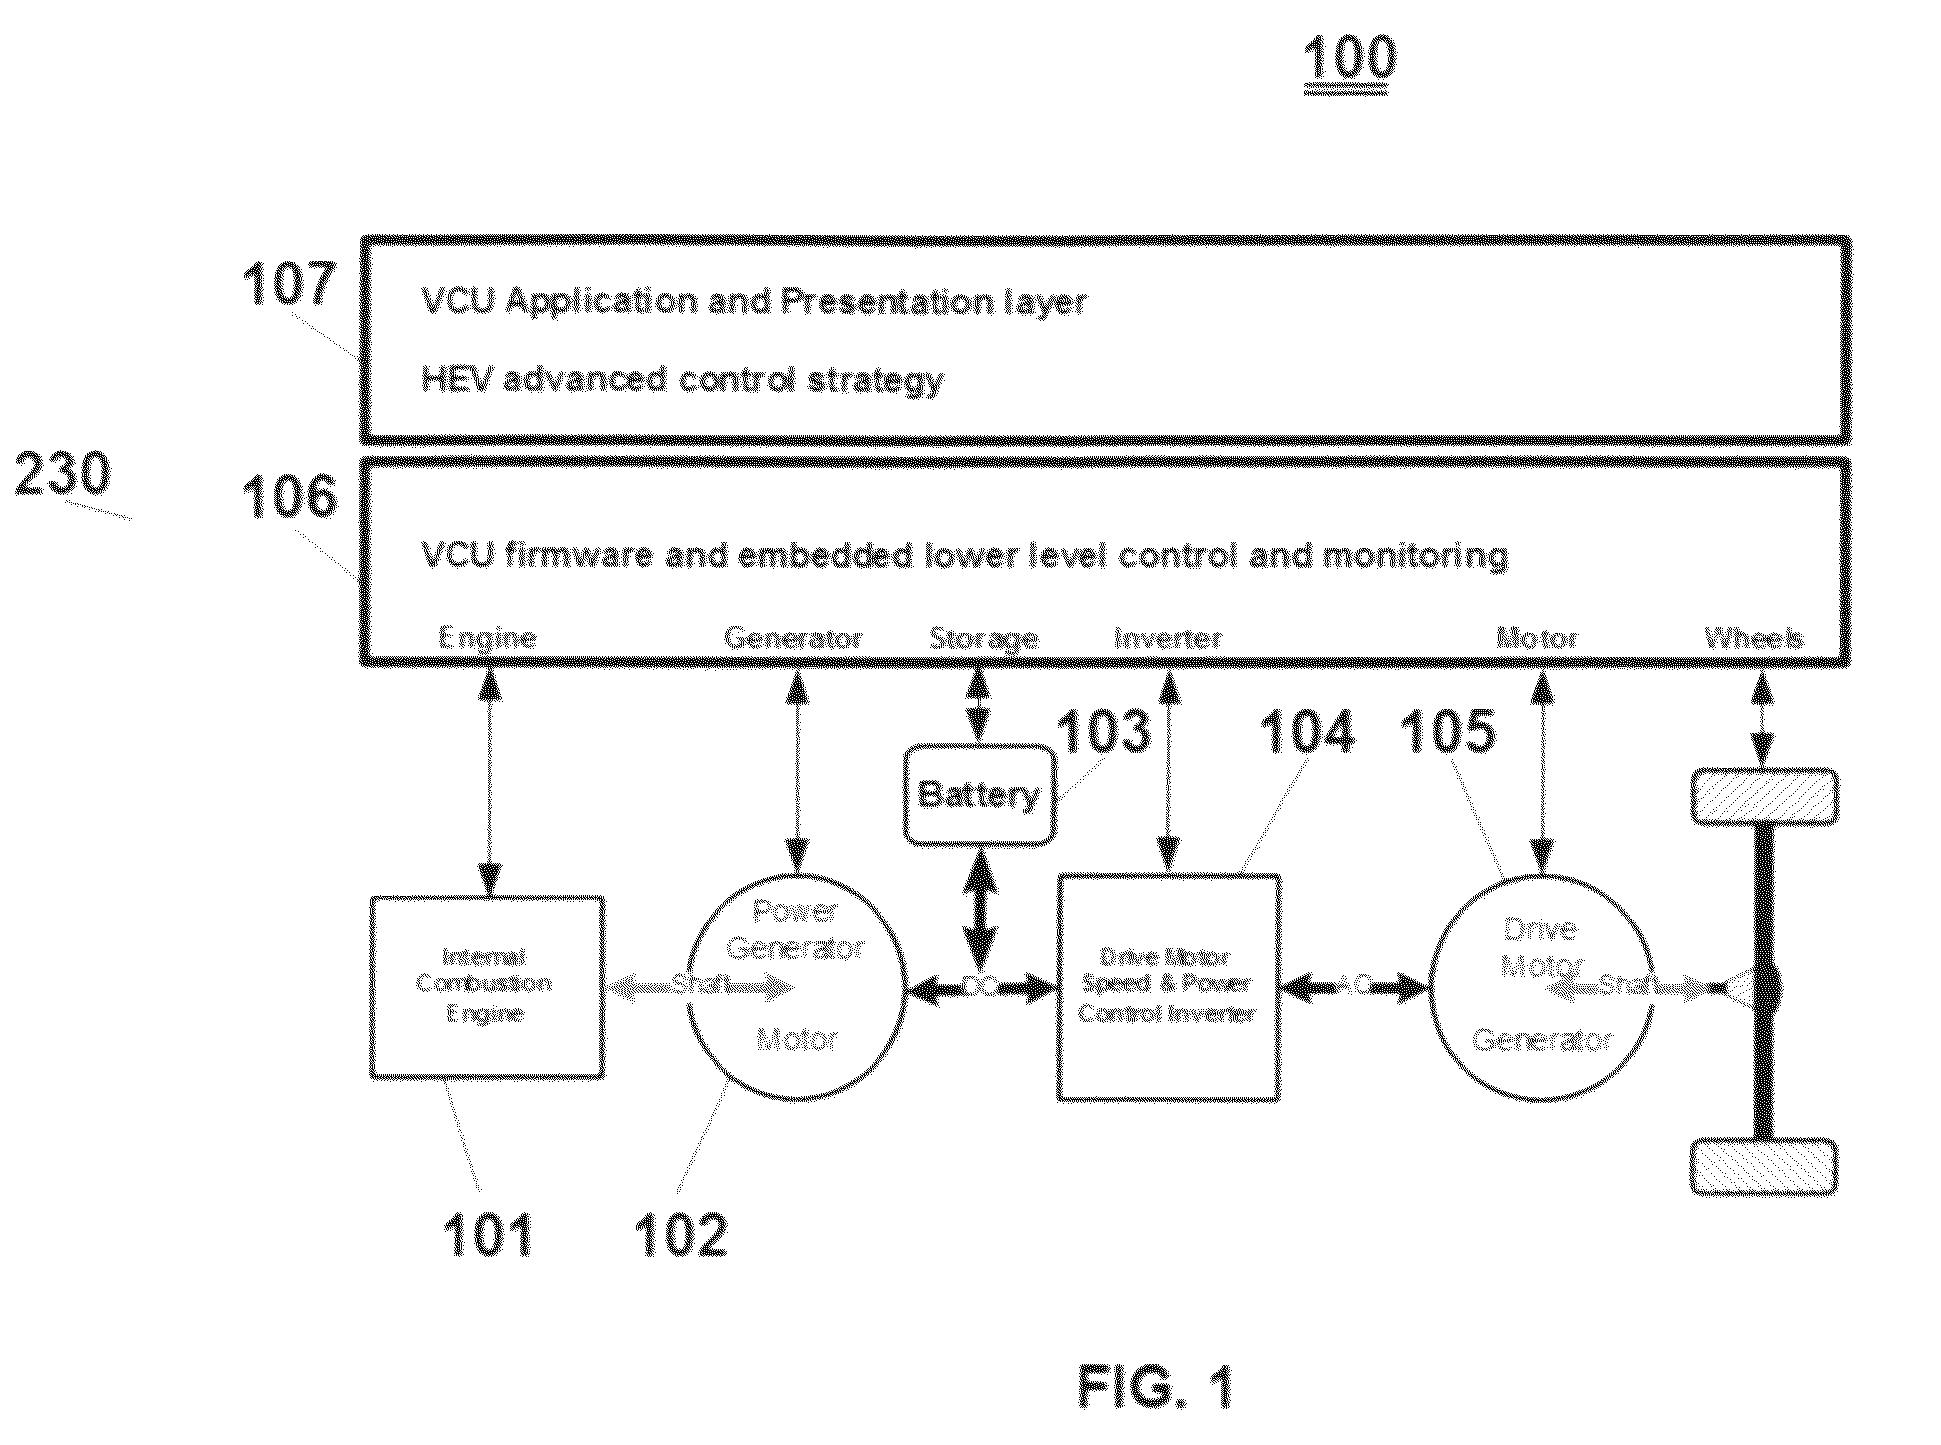 Method and apparatus for a vehicle control unit (VCU), using current and historical instantaneous power usage data, to determine optimum power settings for a hybrid electric drive system